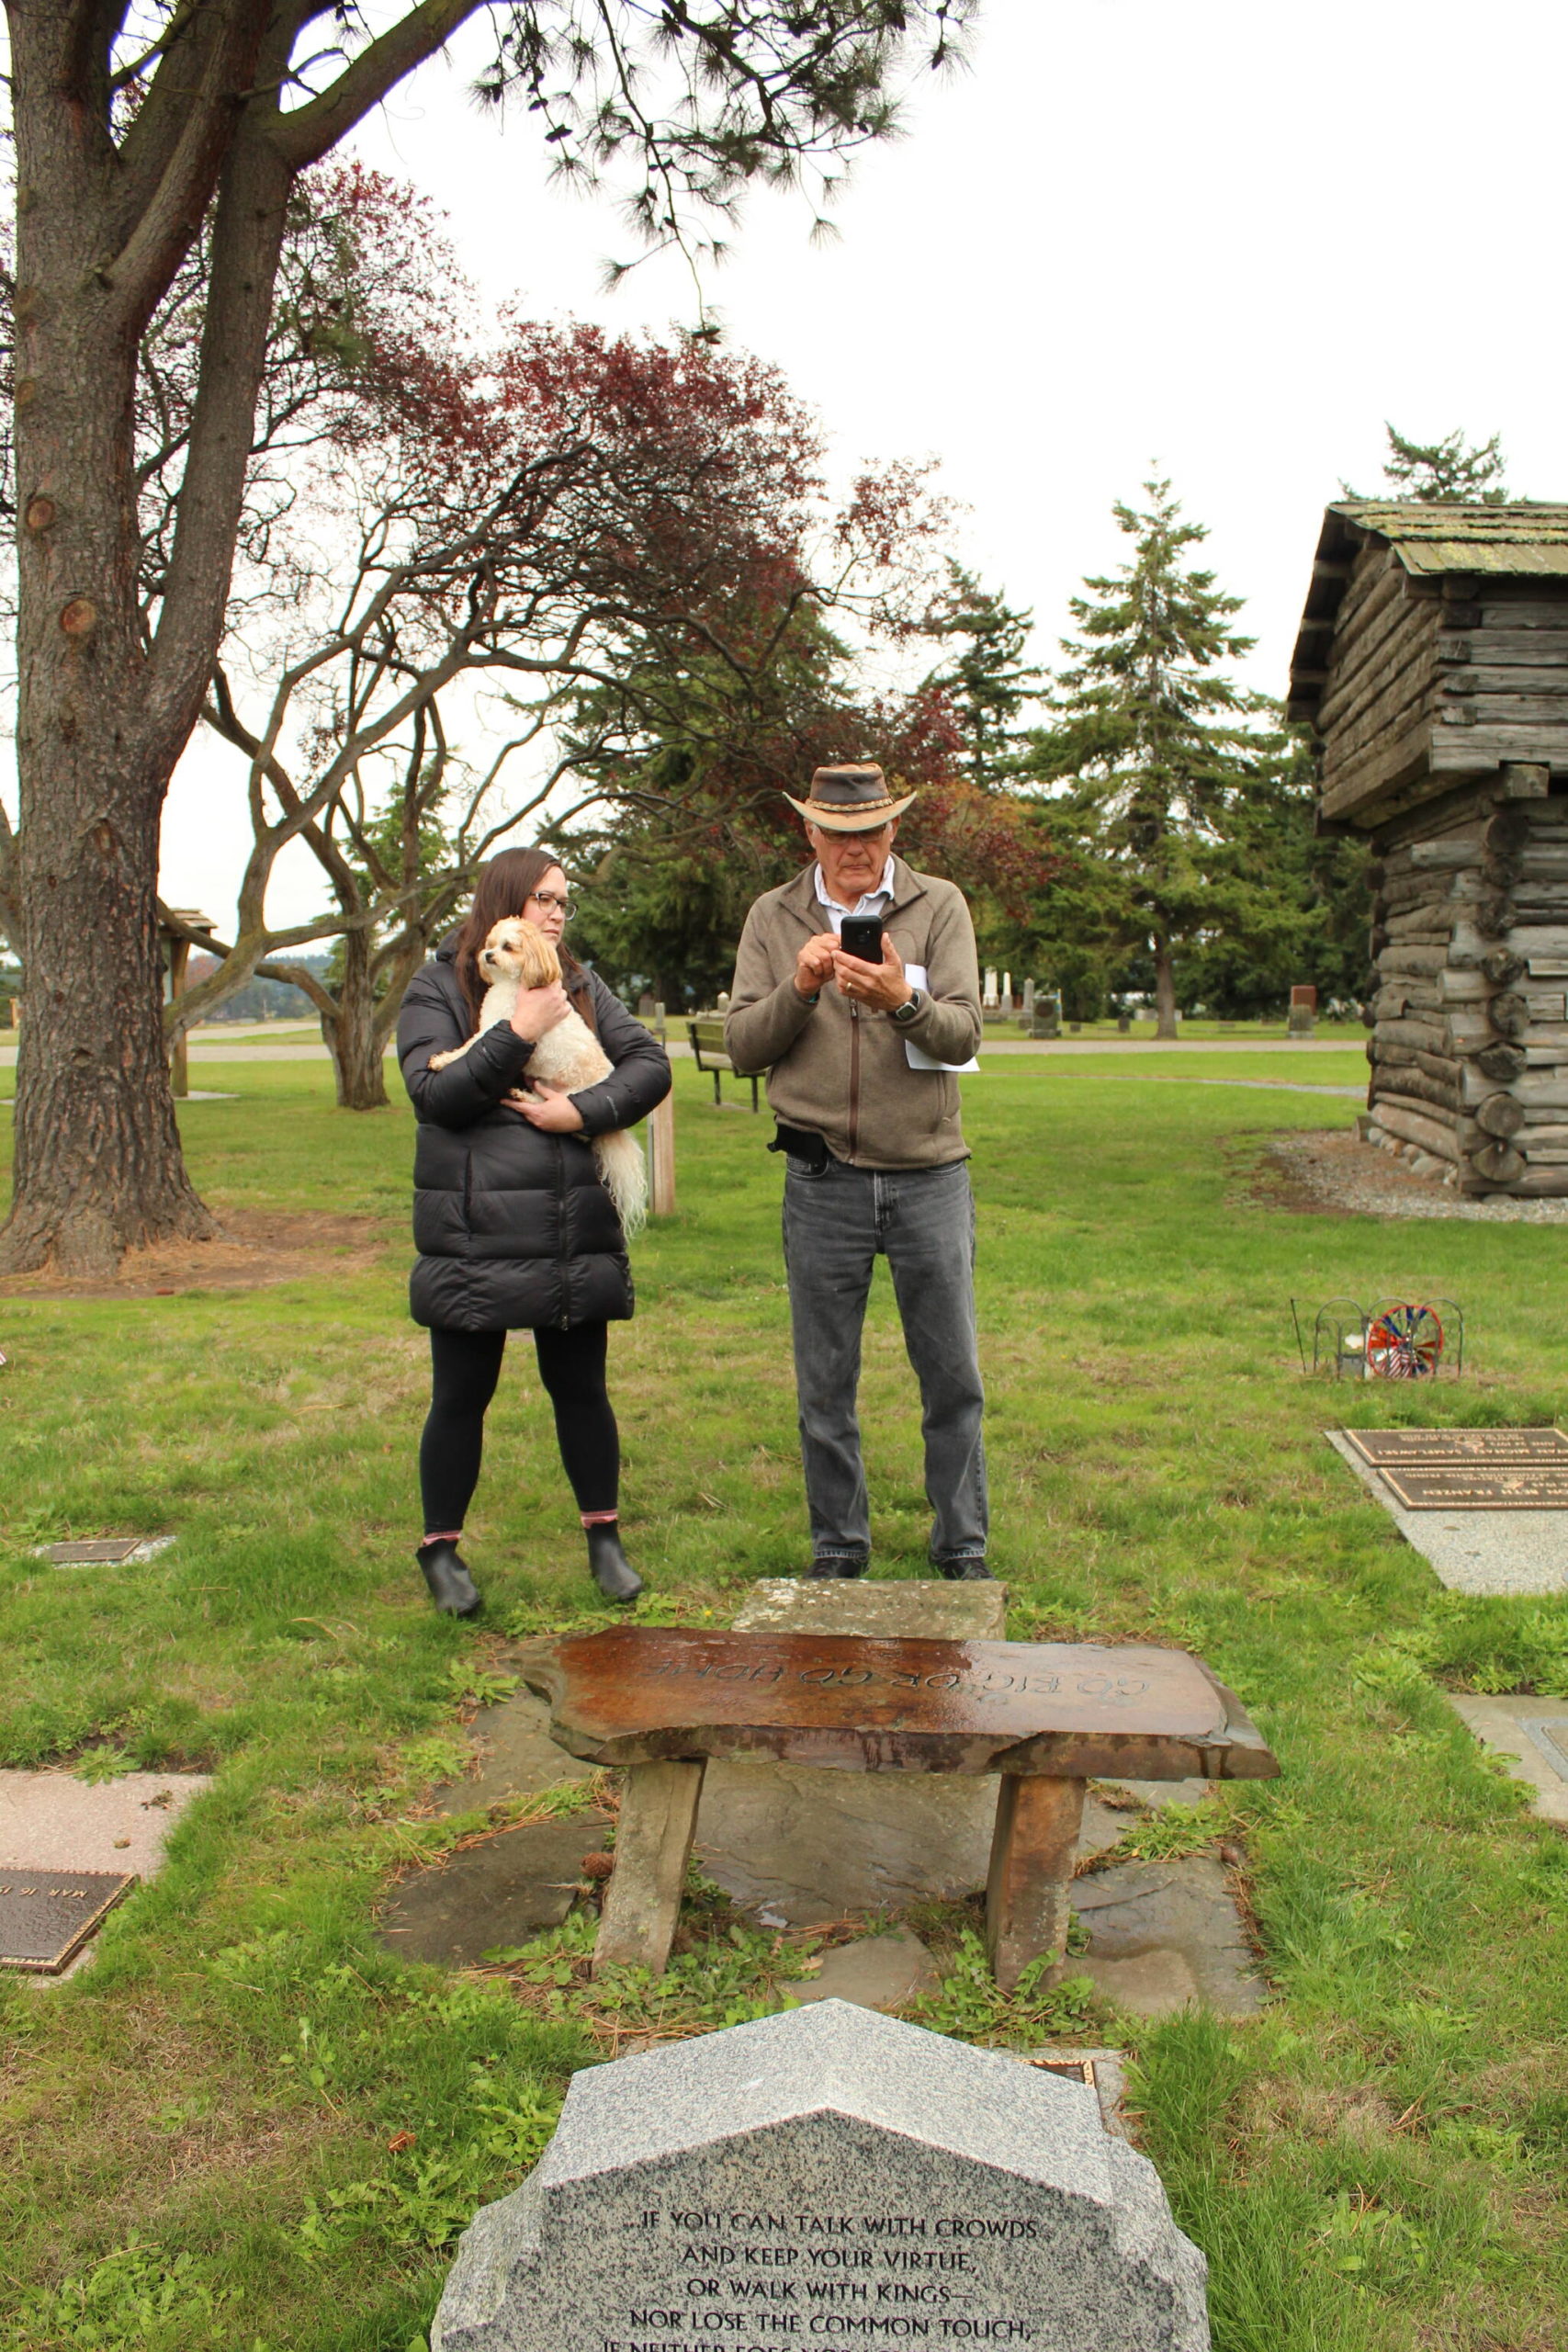 Photo by Karina Andrew/Whidbey News-Times
Laura Foley, left, and Don Meehan locate a grave in Sunnyside Cemetery using Find a Grave's GPS grave locator.